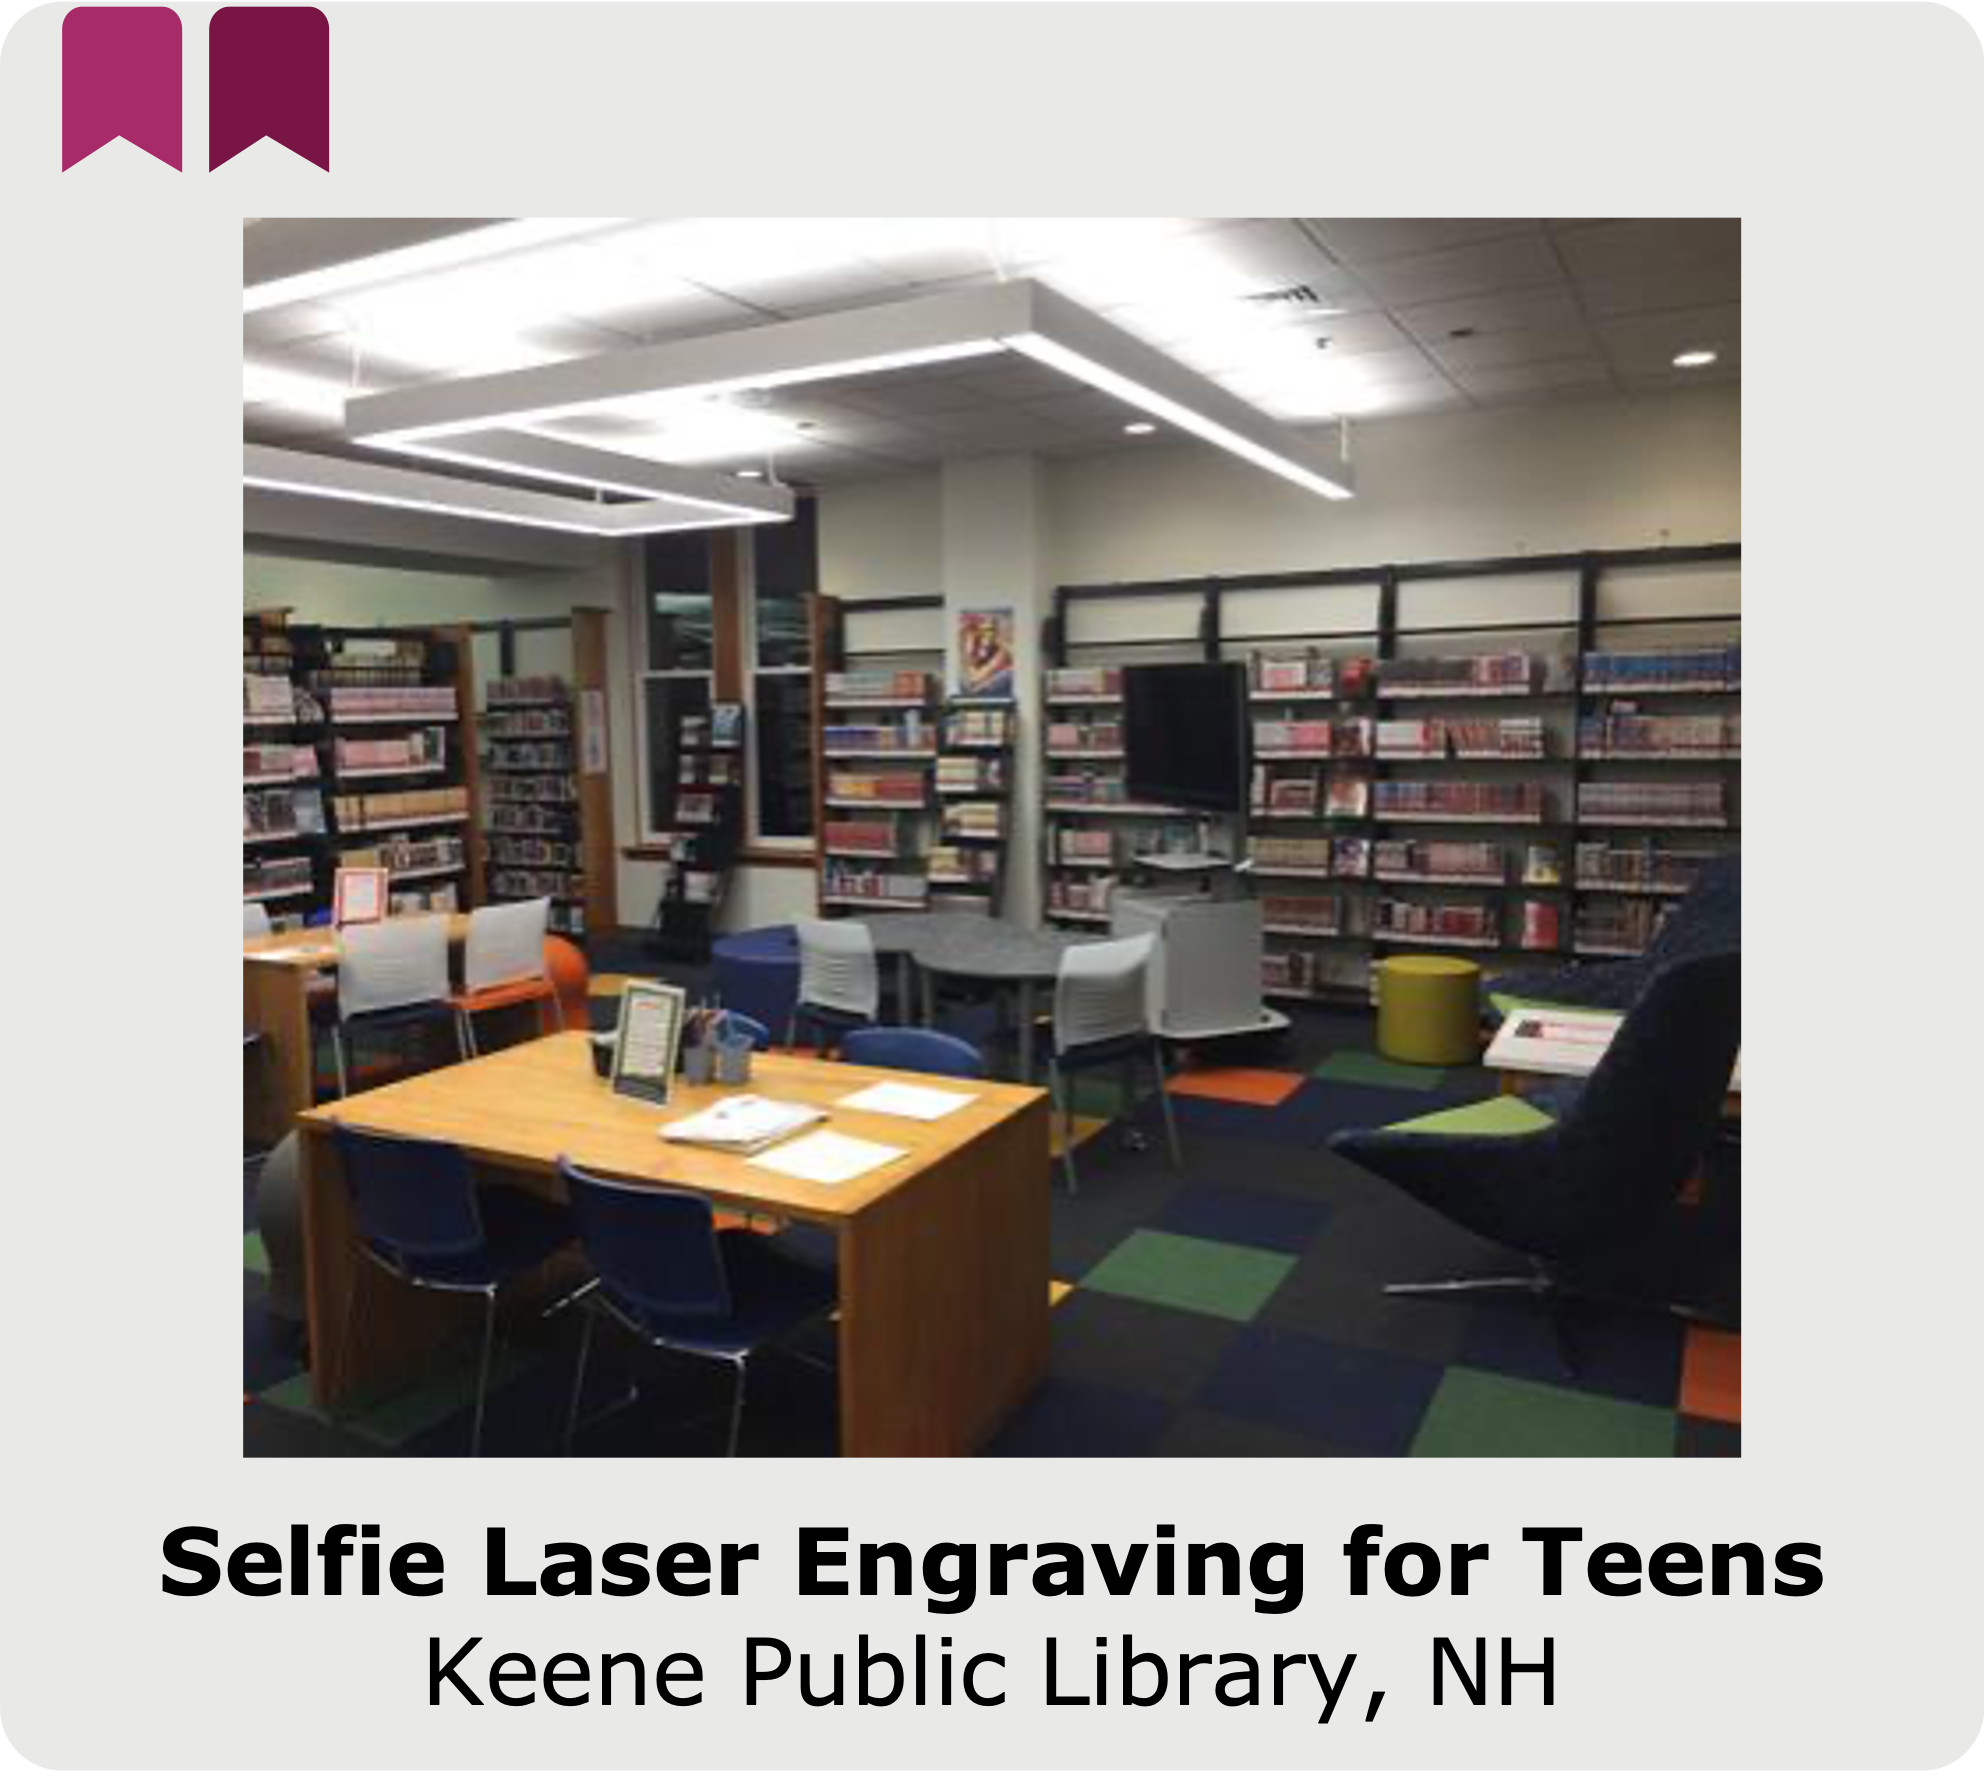 Click to open the case study of the selfie laser engraving program at Keene Public Library in New Hampshire.